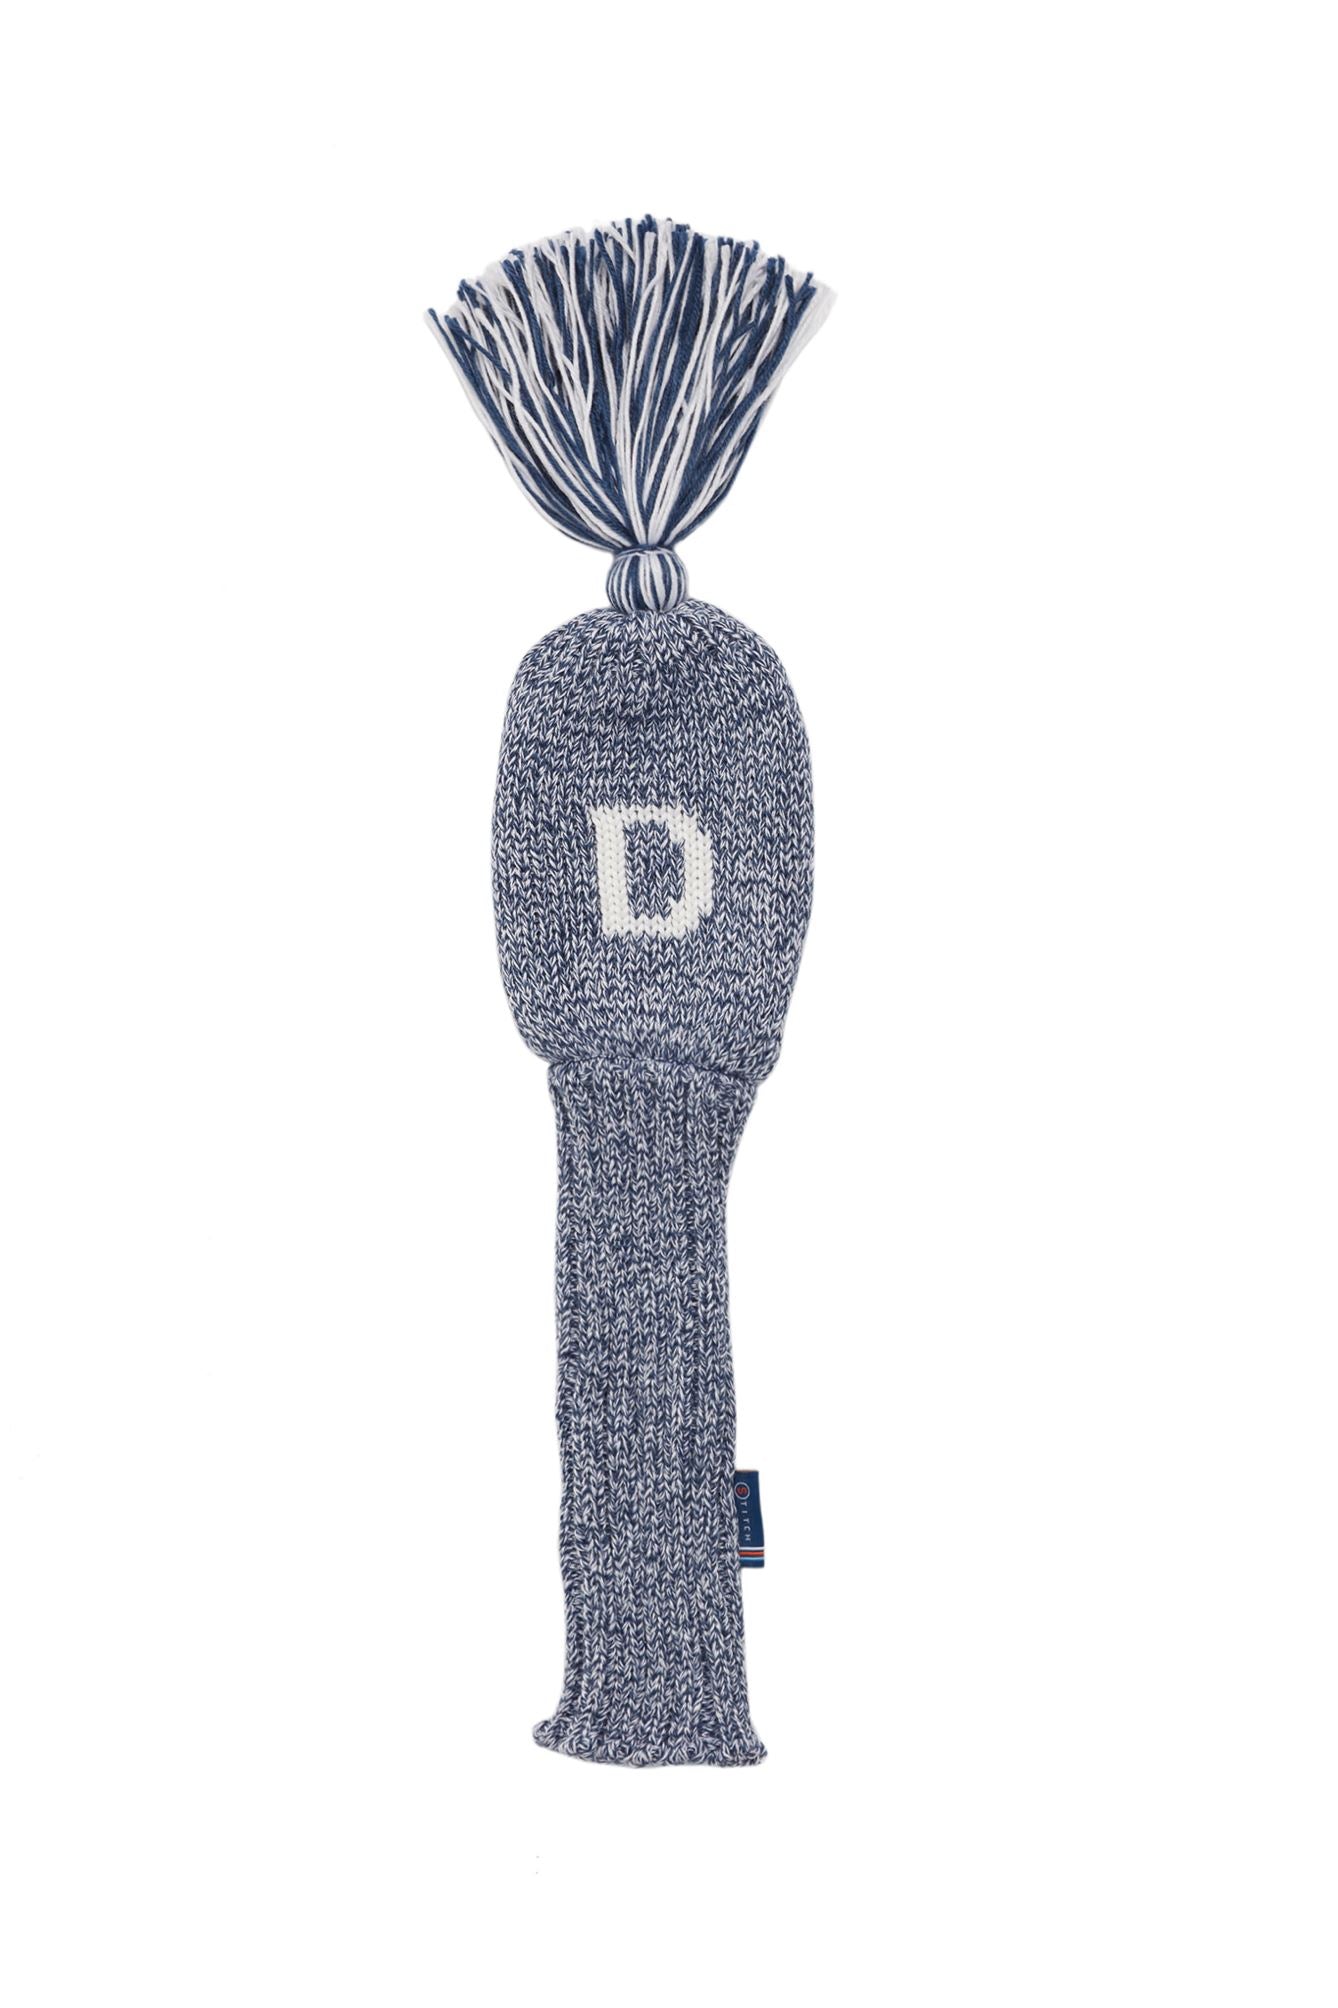 Contender Knit Head Cover